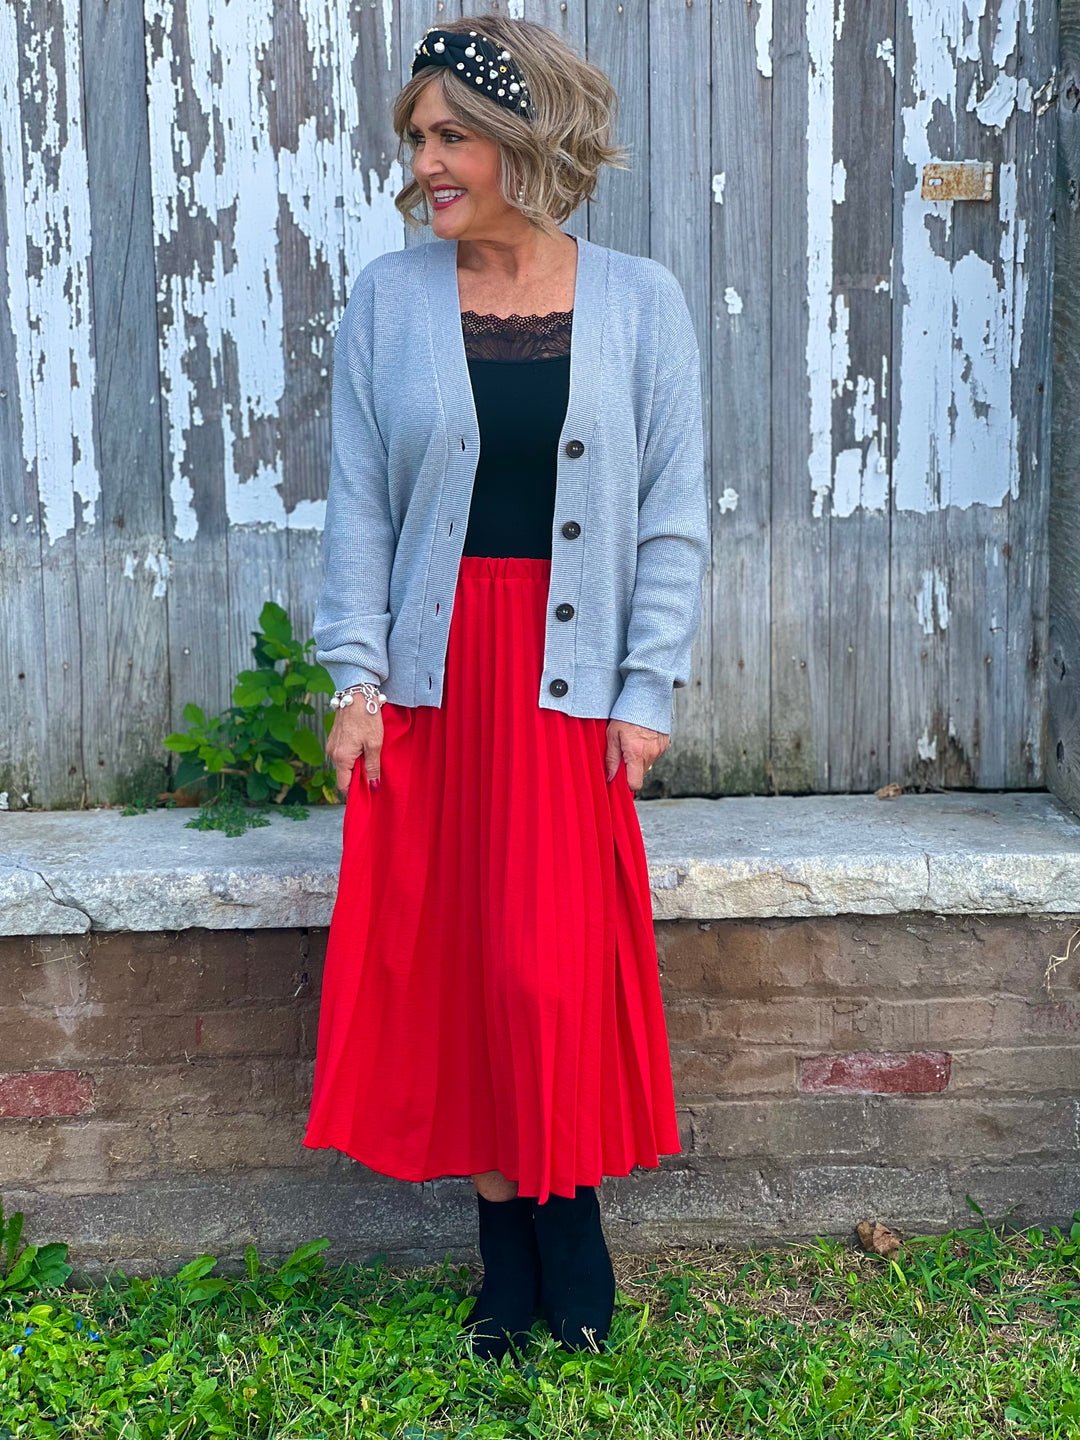 Pleated Skirt - 2 Color Options - Final Sale